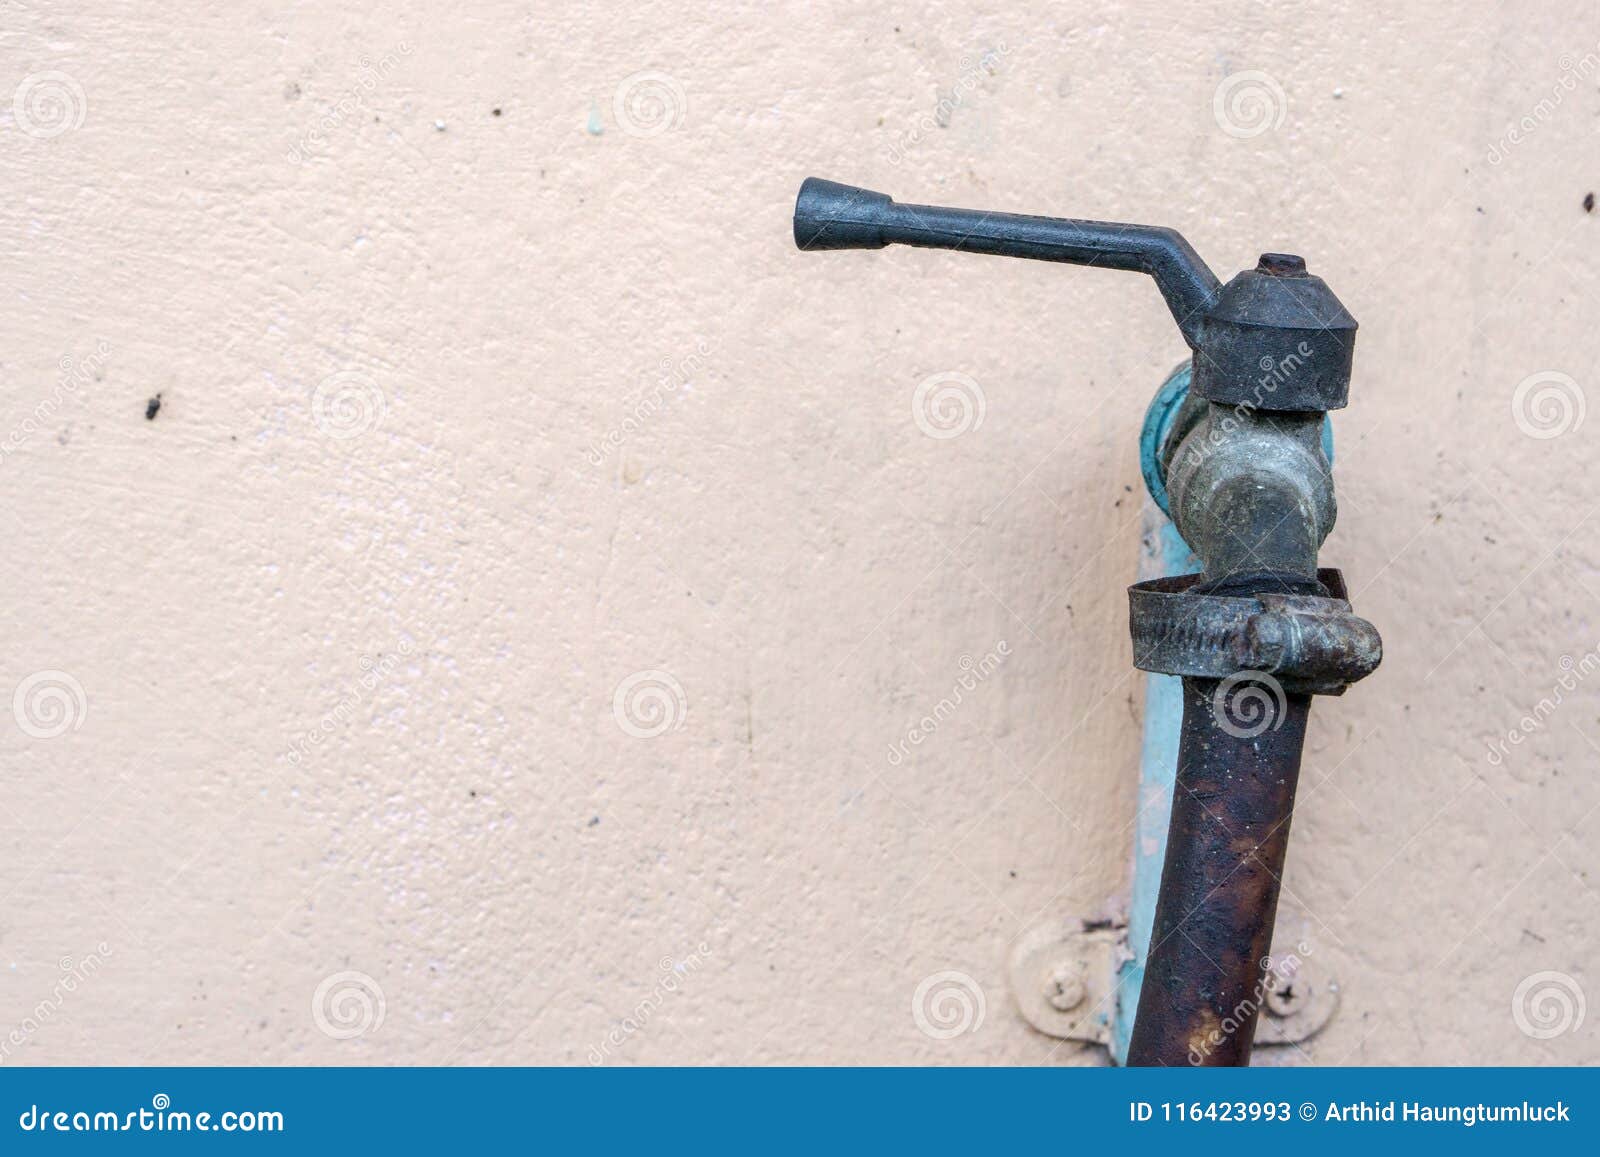 Water Faucet With Grass At Outdoor House Stock Image Image Of